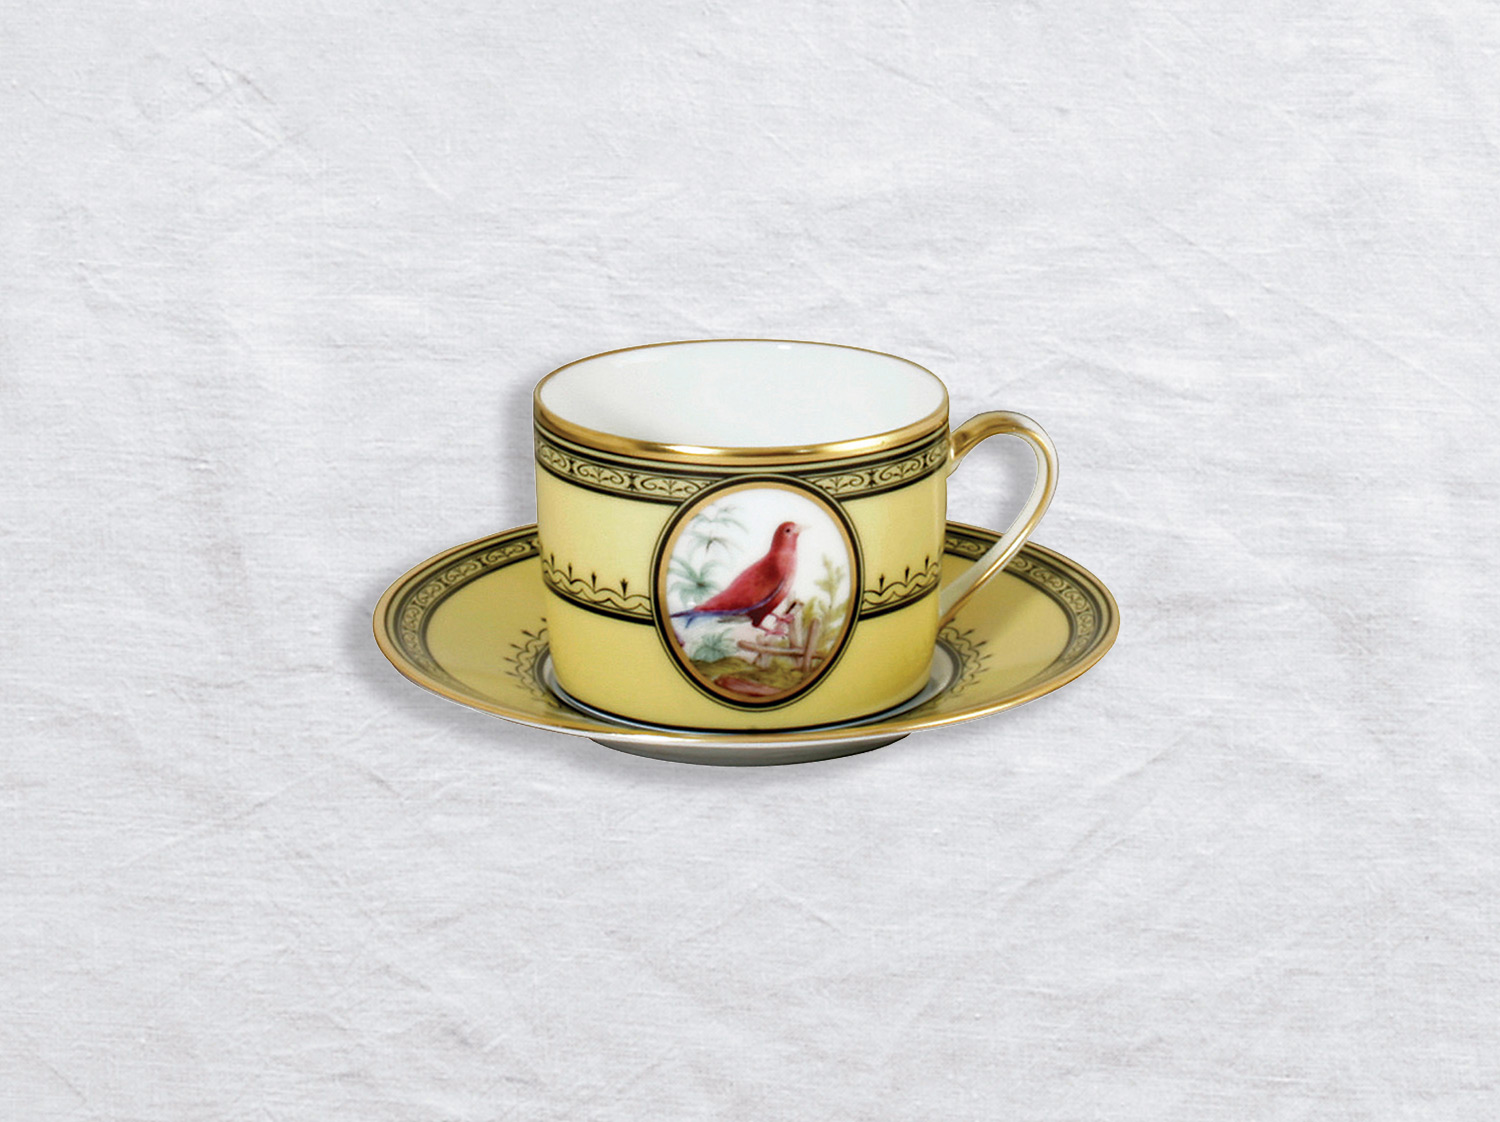 China Tea cup and saucer Le rolle de Madagascar 5 oz of the collection Le rolle de madagascar | Bernardaud